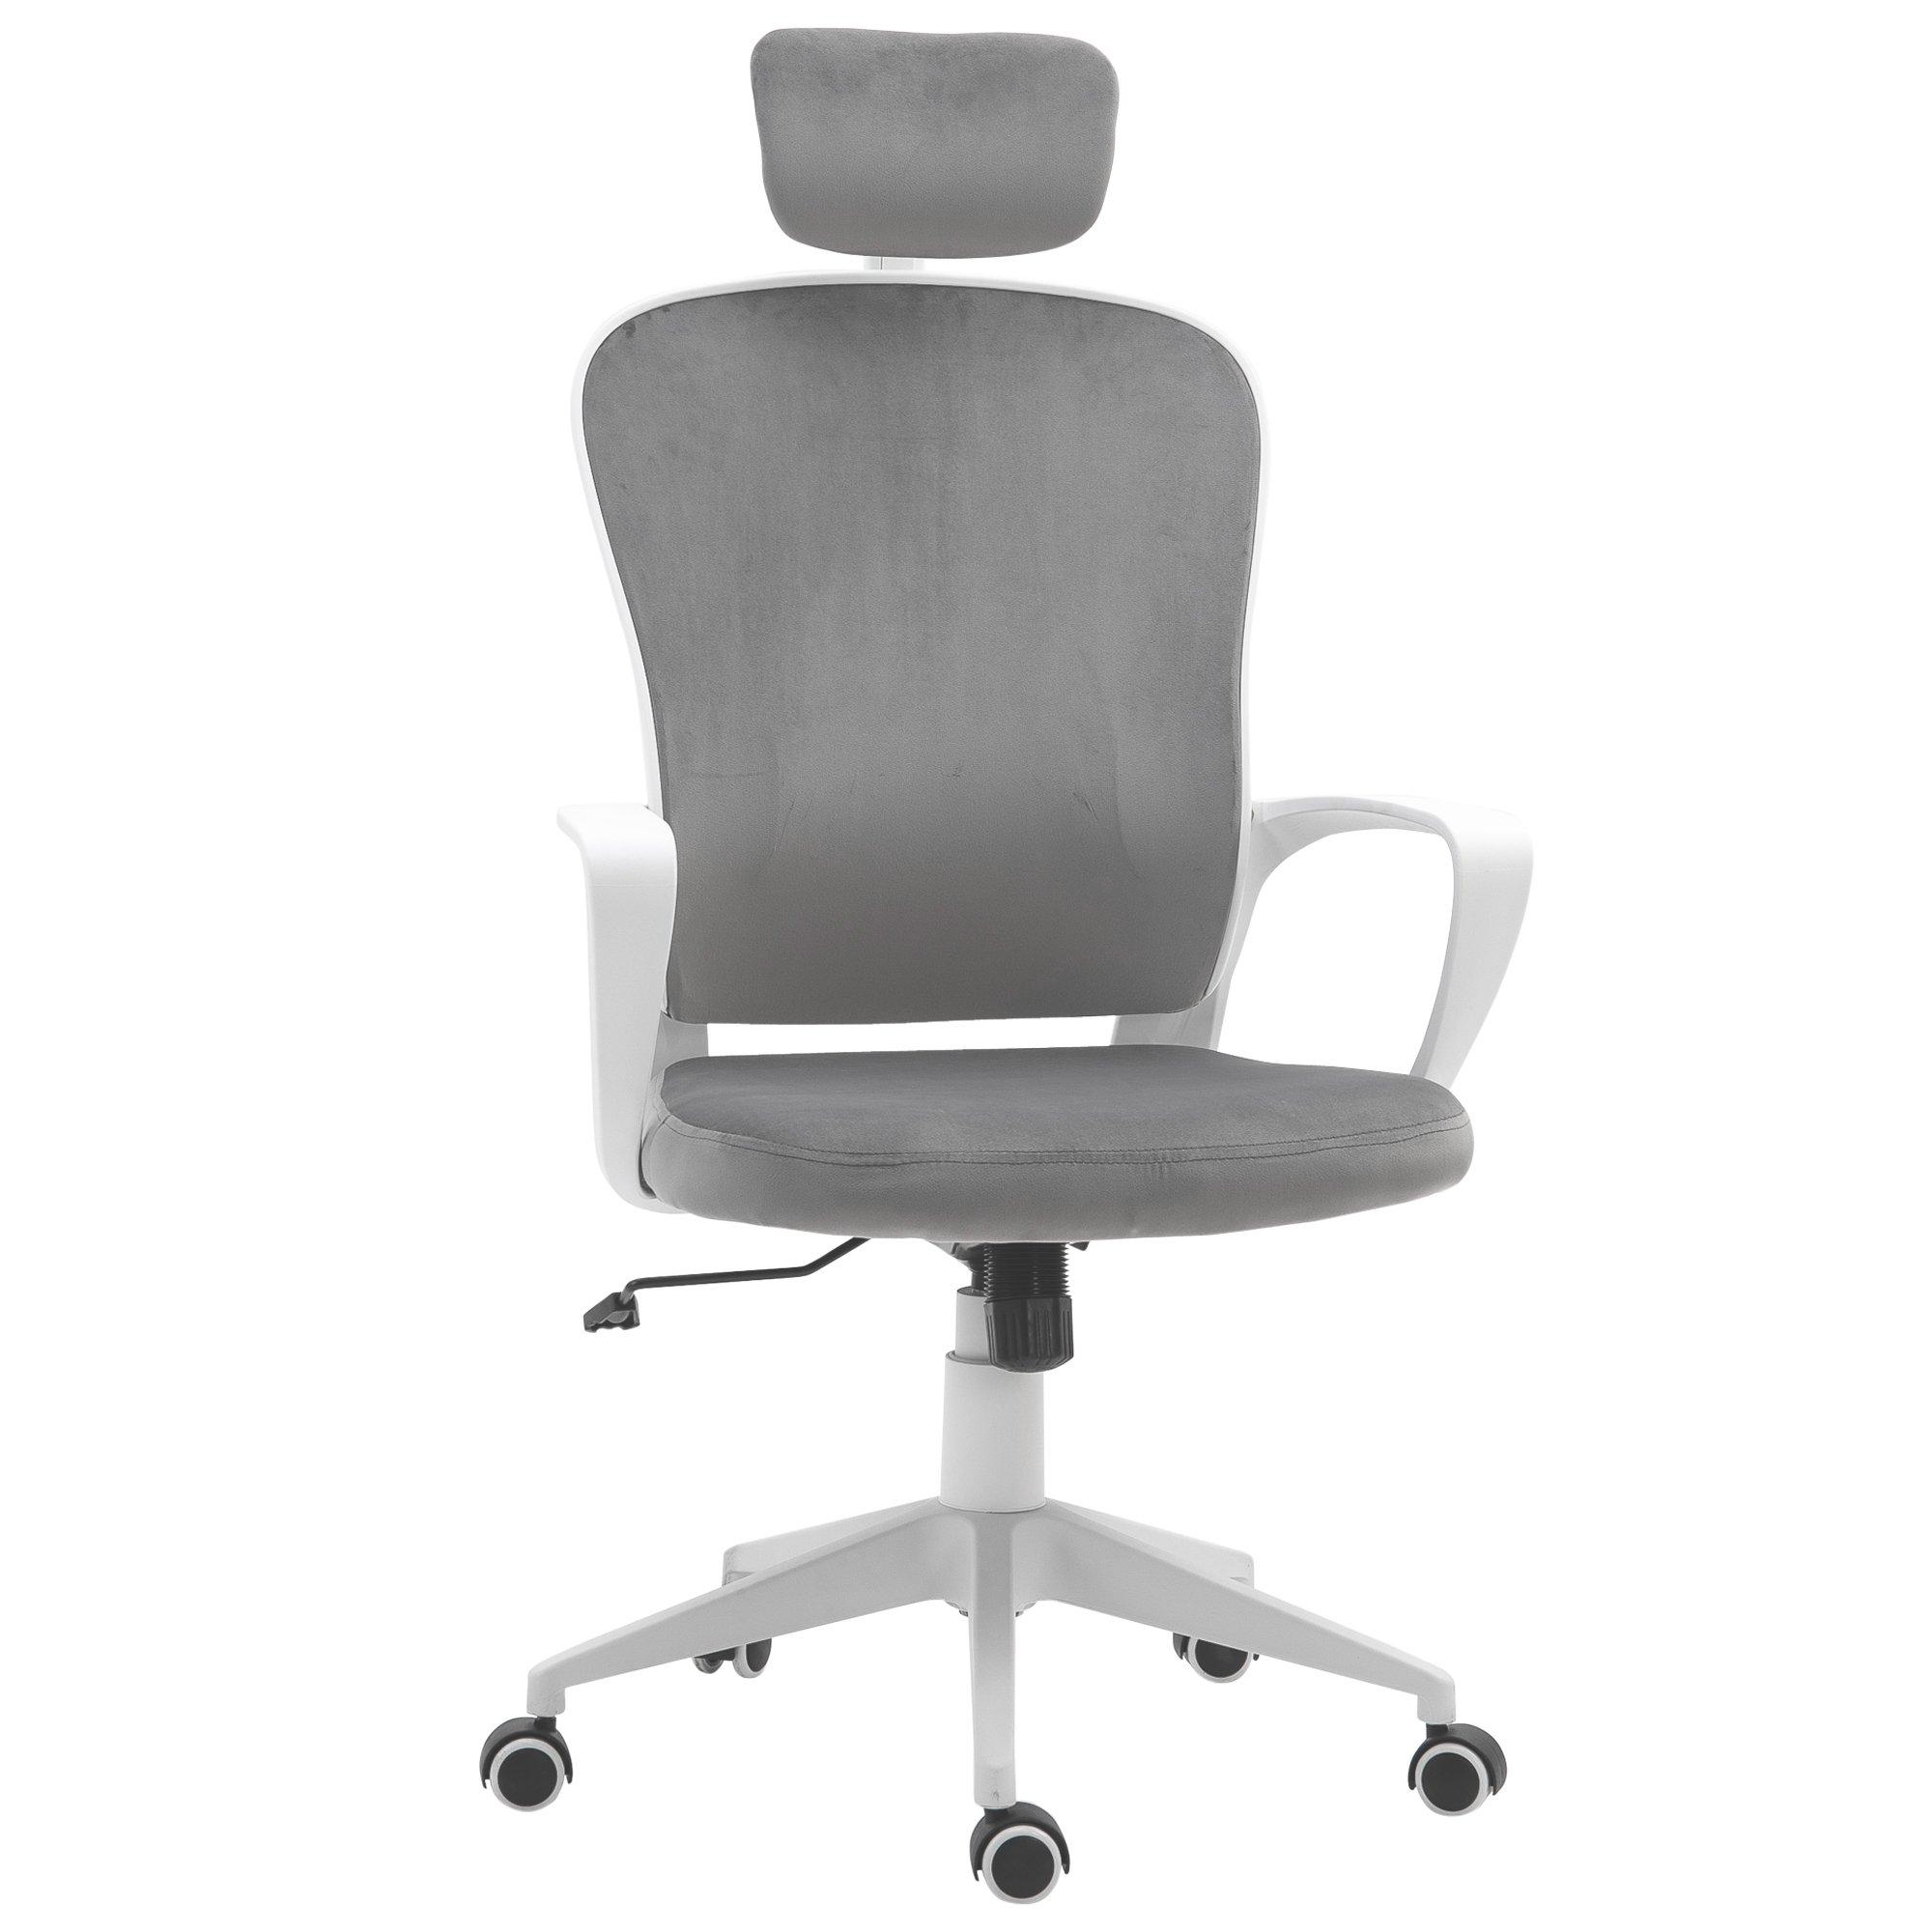 High-Back Office Chair Home Office Rocking with Wheel, Up-Down Headrest